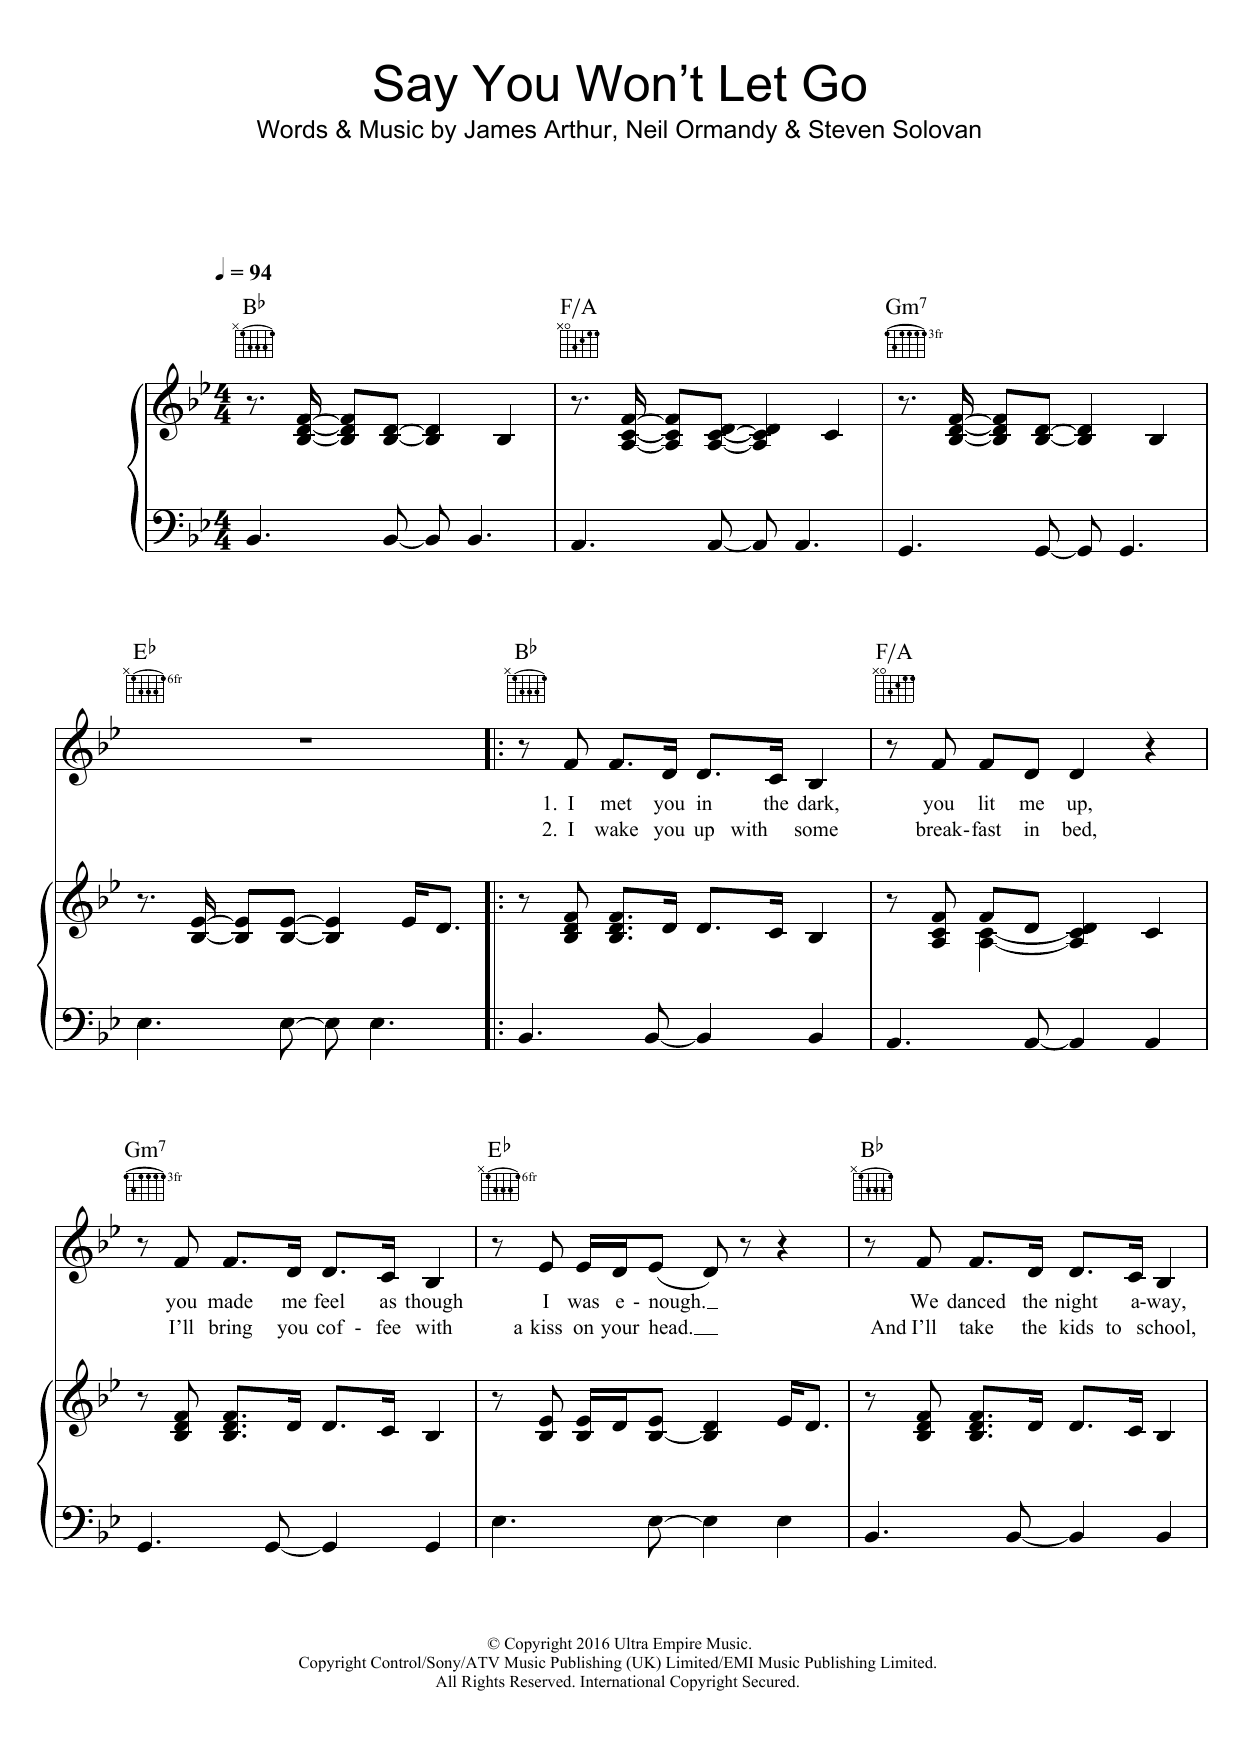 Say You Won't Let Go sheet music